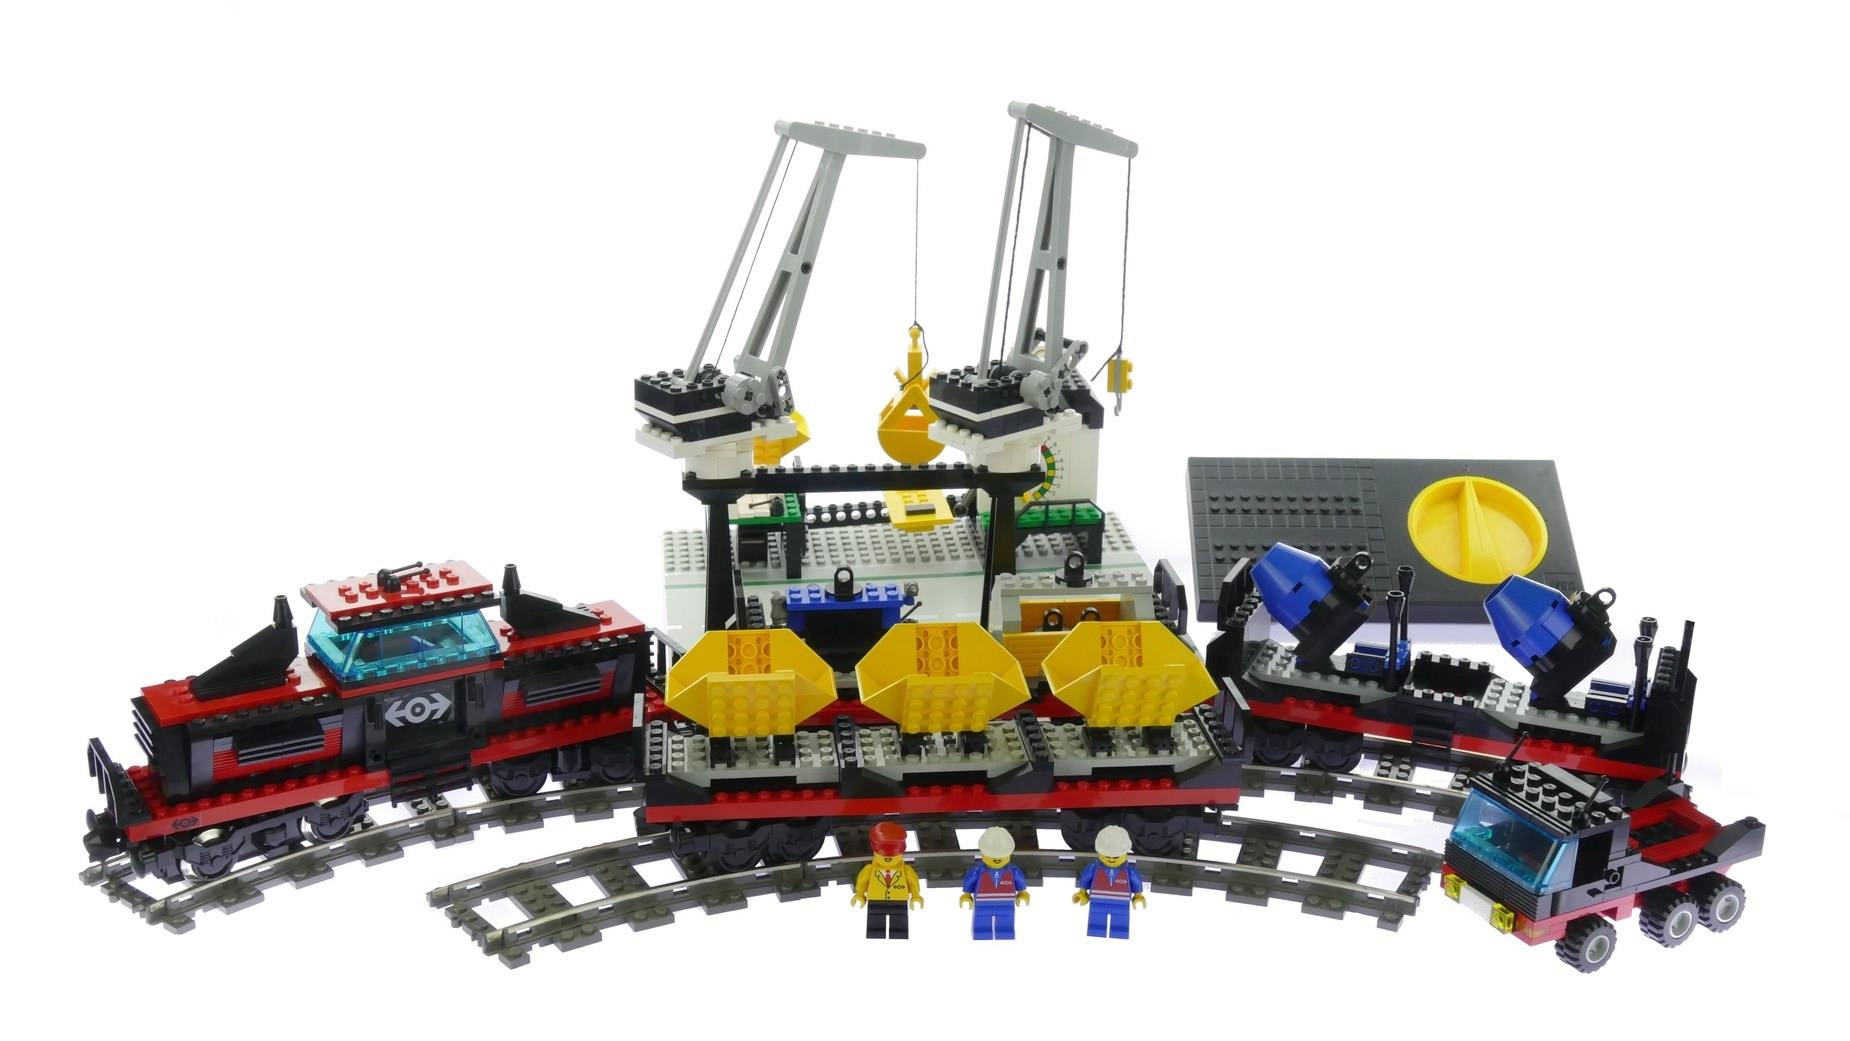 Freight and Crane Railway - LEGO #4565 (Building Sets > Town > Train)